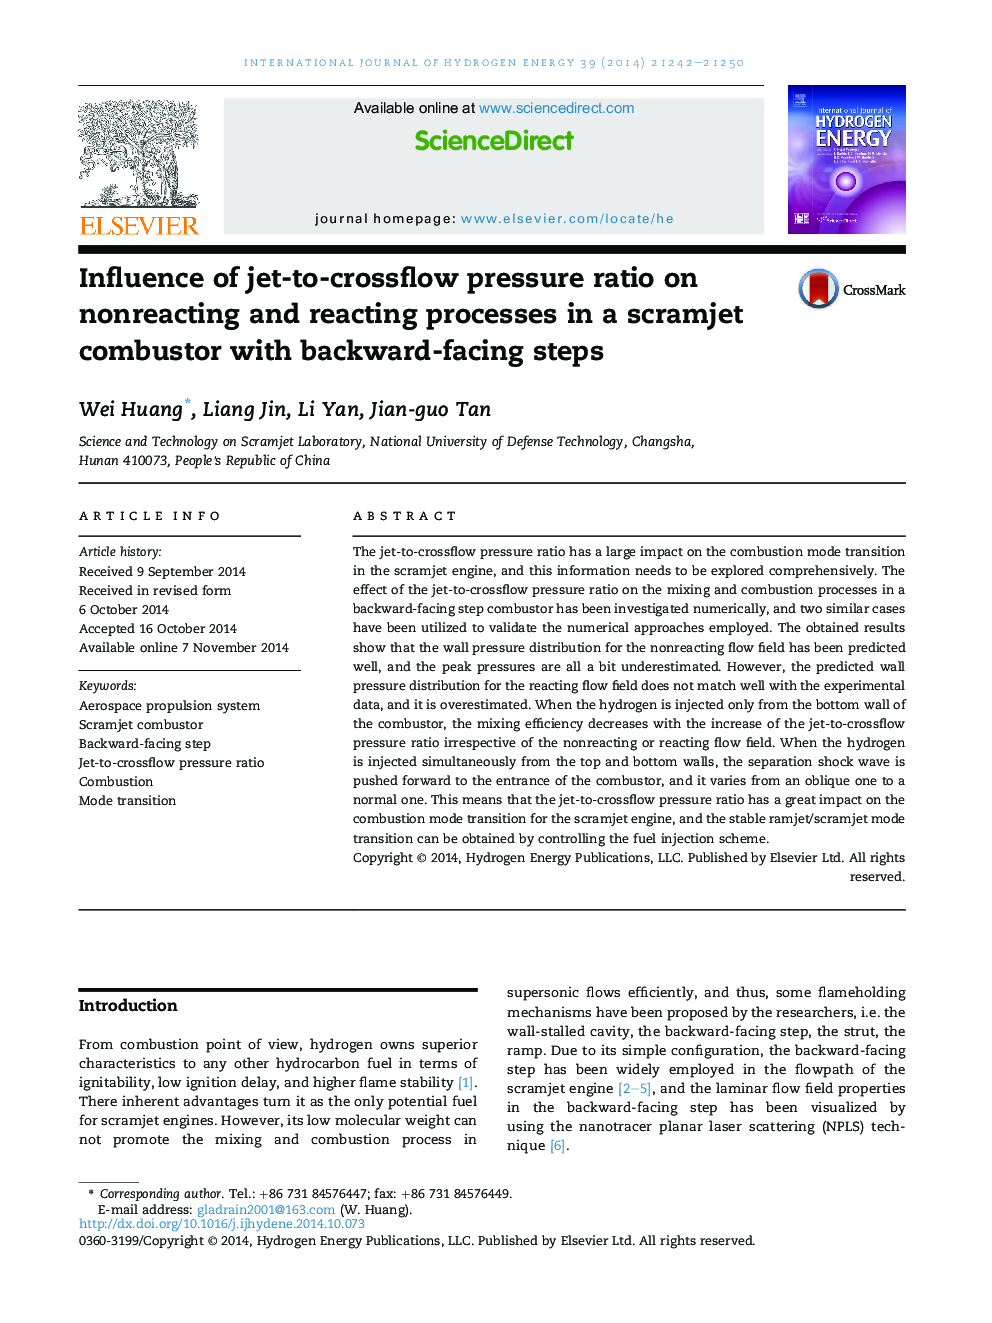 Influence of jet-to-crossflow pressure ratio on nonreacting and reacting processes in a scramjet combustor with backward-facing steps